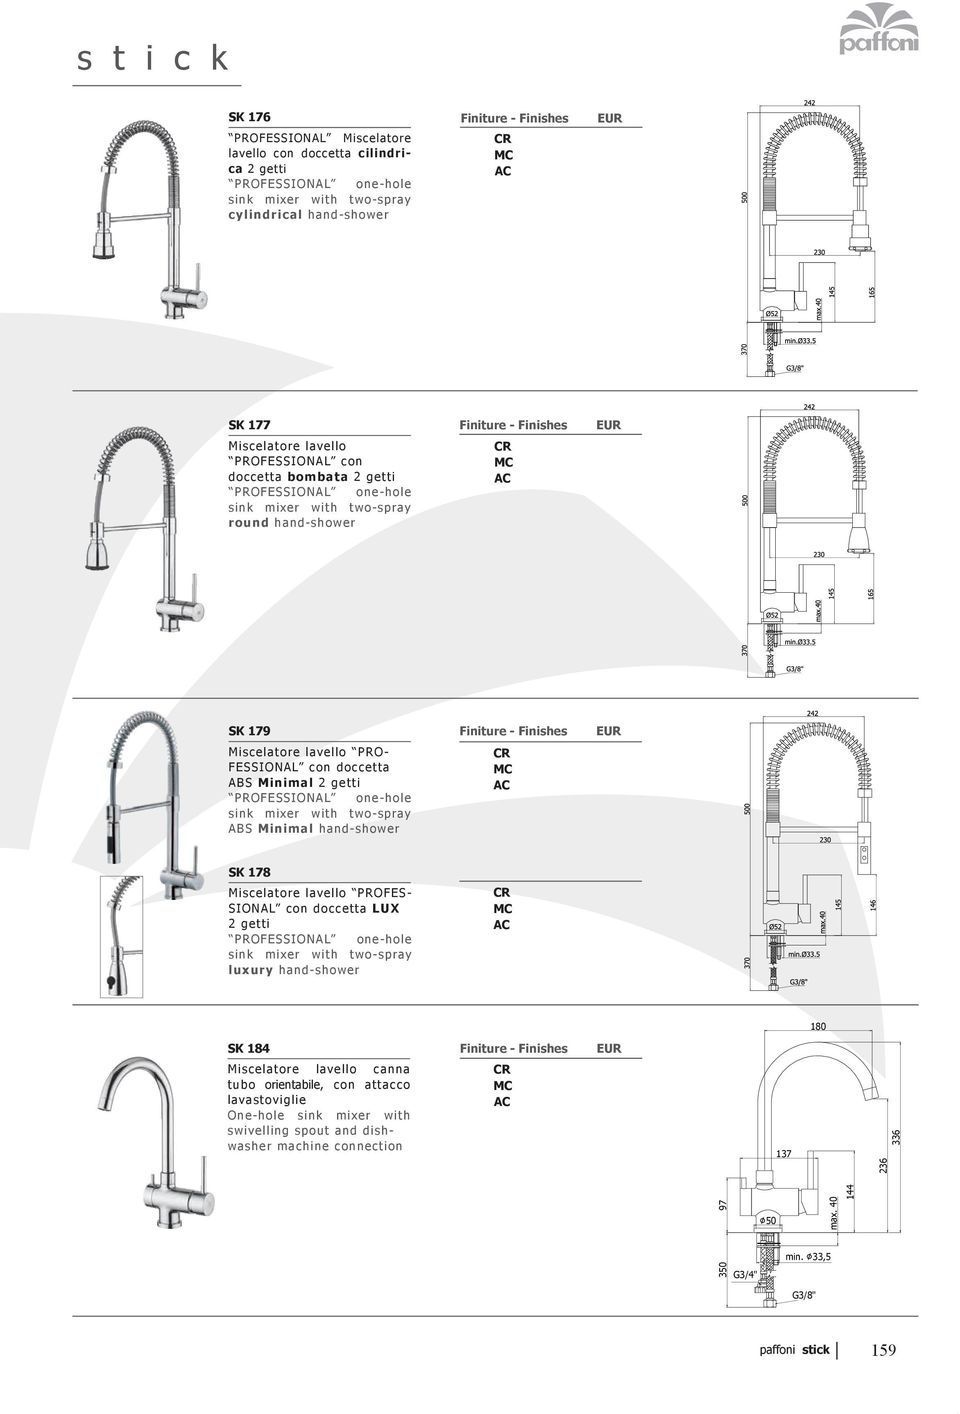 PROFESSIONAL one-hole sink mixer with two-spray ABS Minimal hand-shower SK 178 Miscelatore lavello PROFES- SIONAL con doccetta LUX 2 getti PROFESSIONAL one-hole sink mixer with